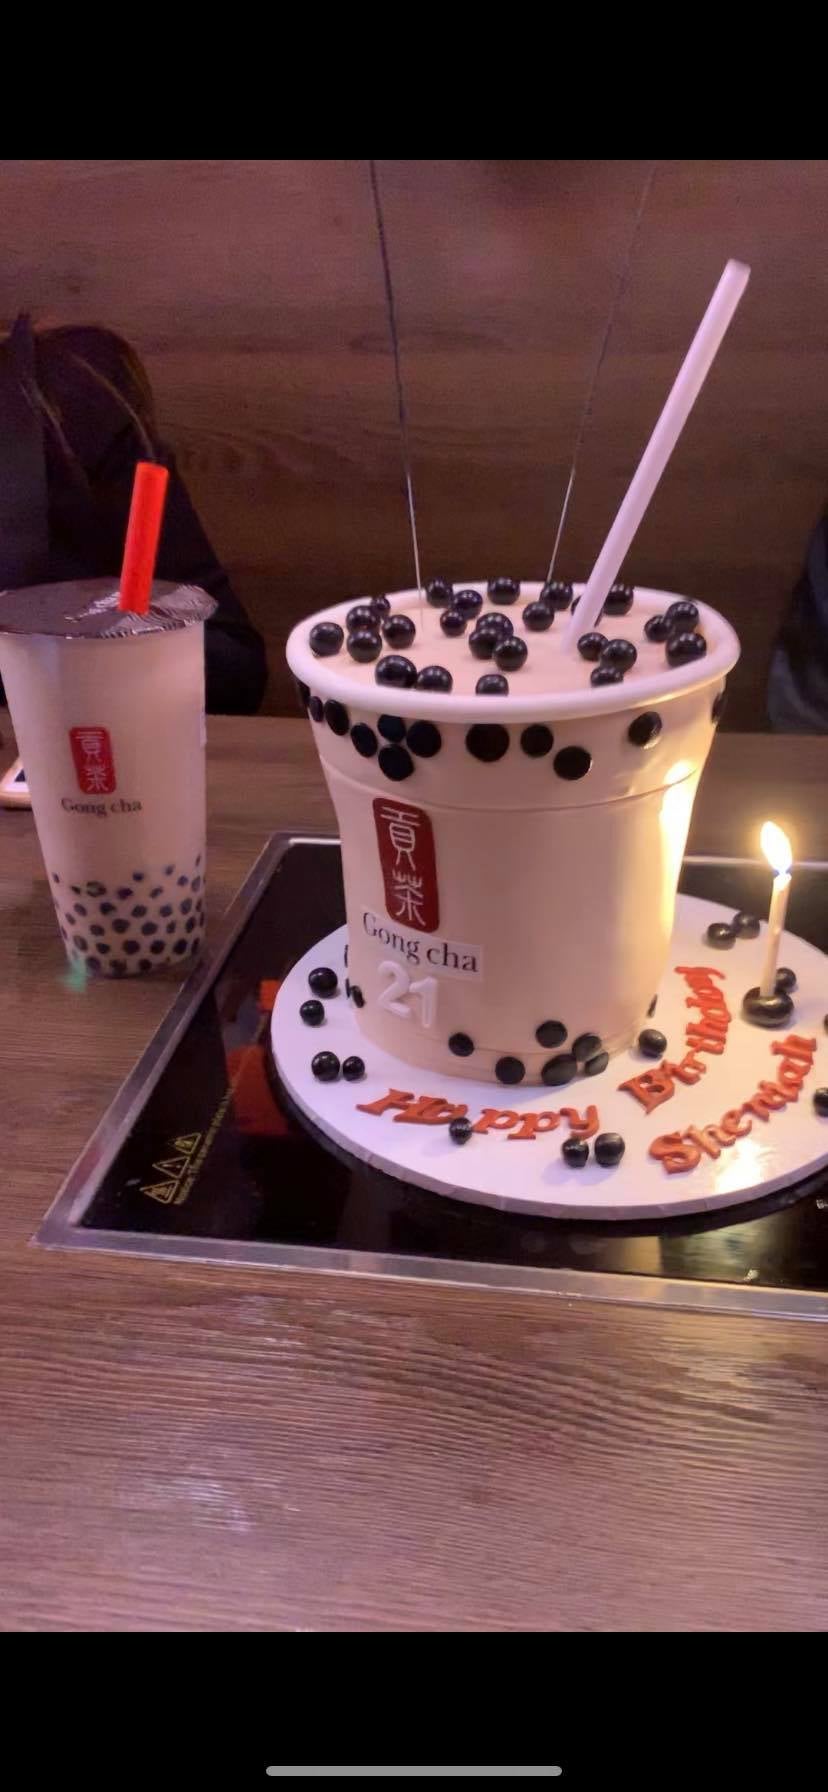 Girl Surprised with 3D Boba Themed Cake on Her 21st Birthday - WORLD OF BUZZ